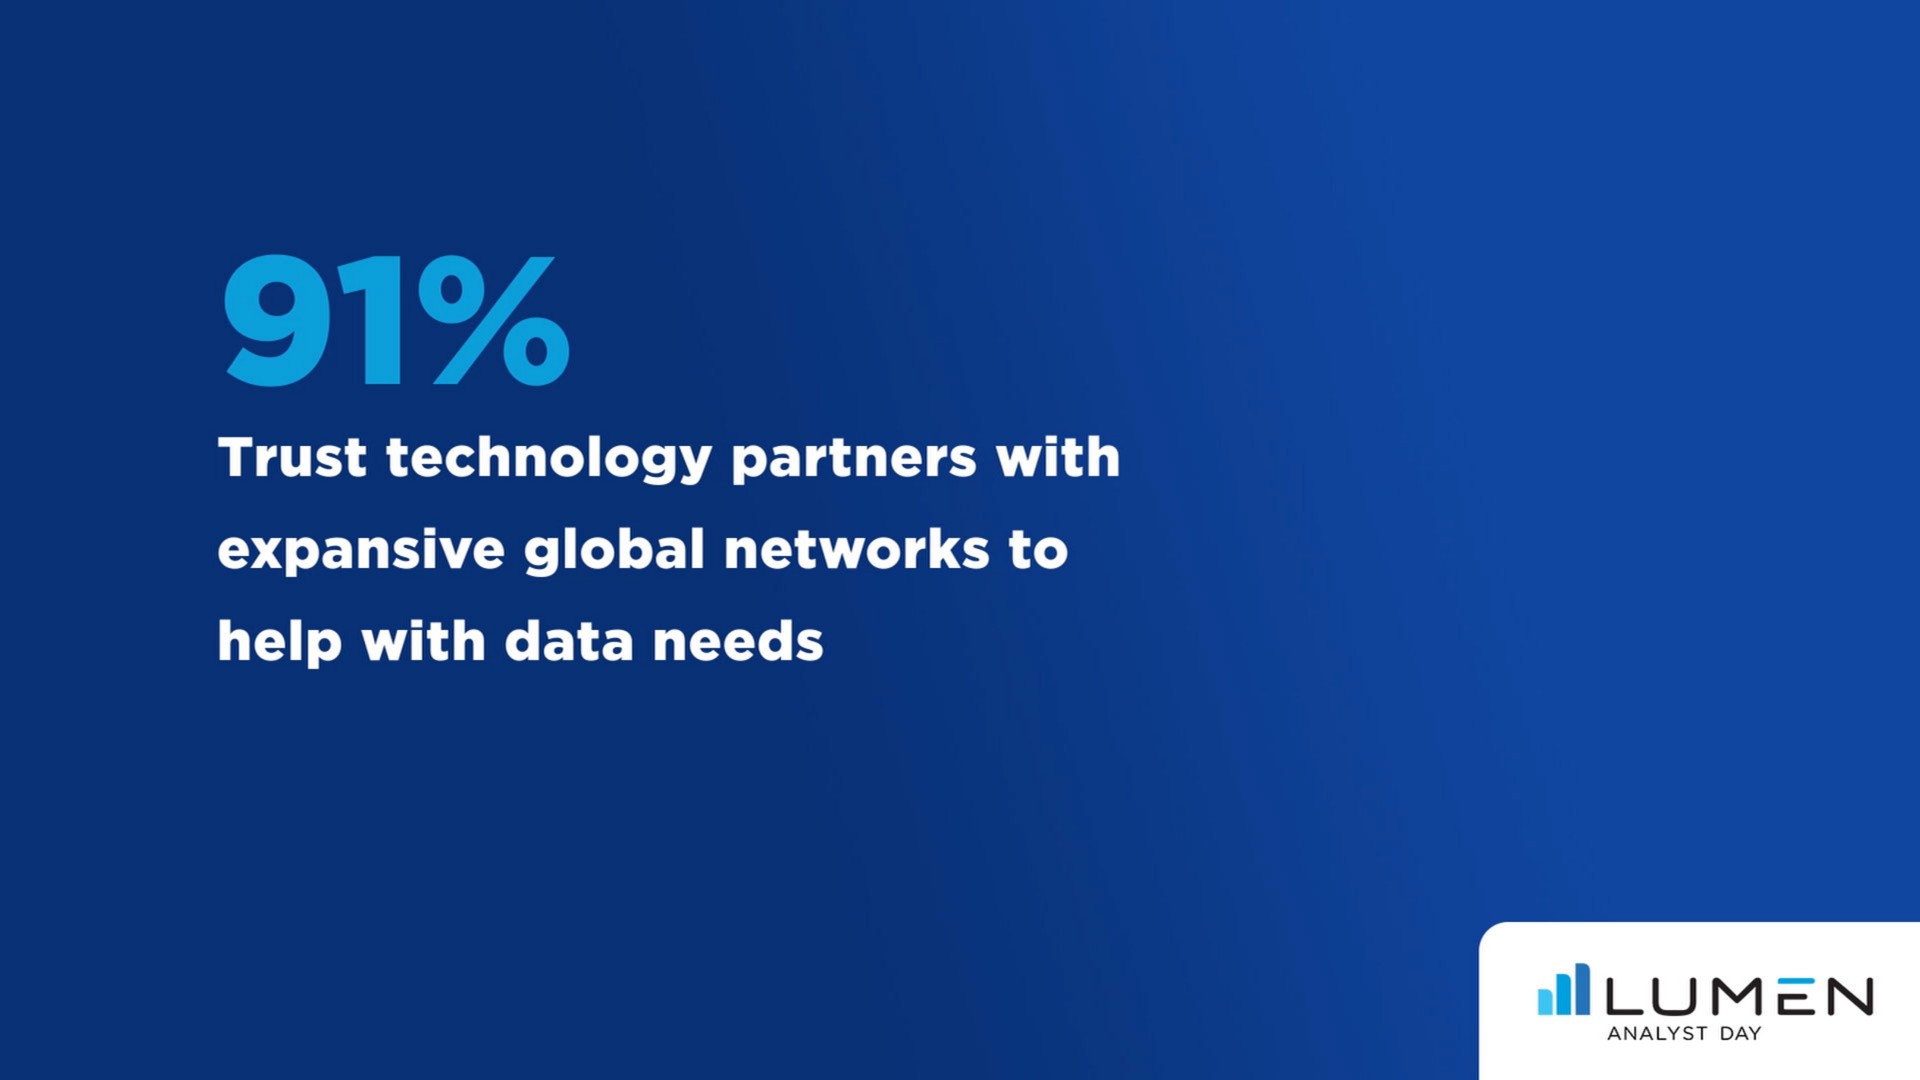 trust technology partners with expansive global networks to help with data needs | Lumen